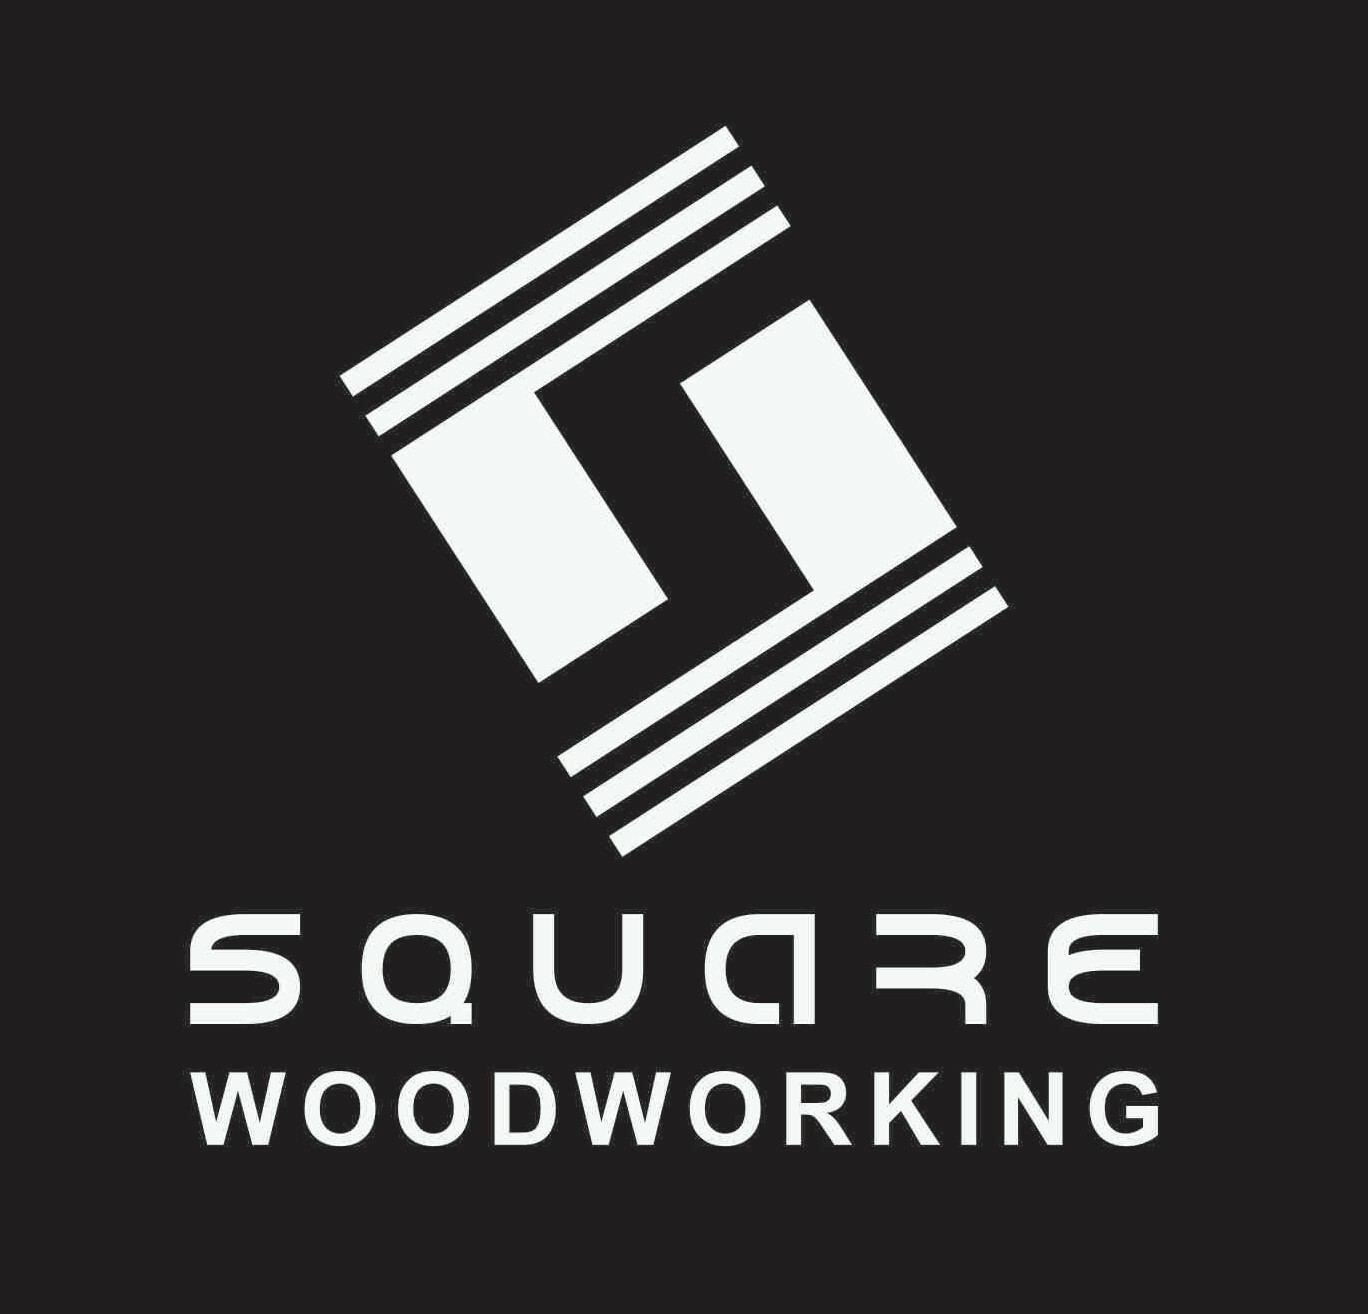 Square Woodworking's logo